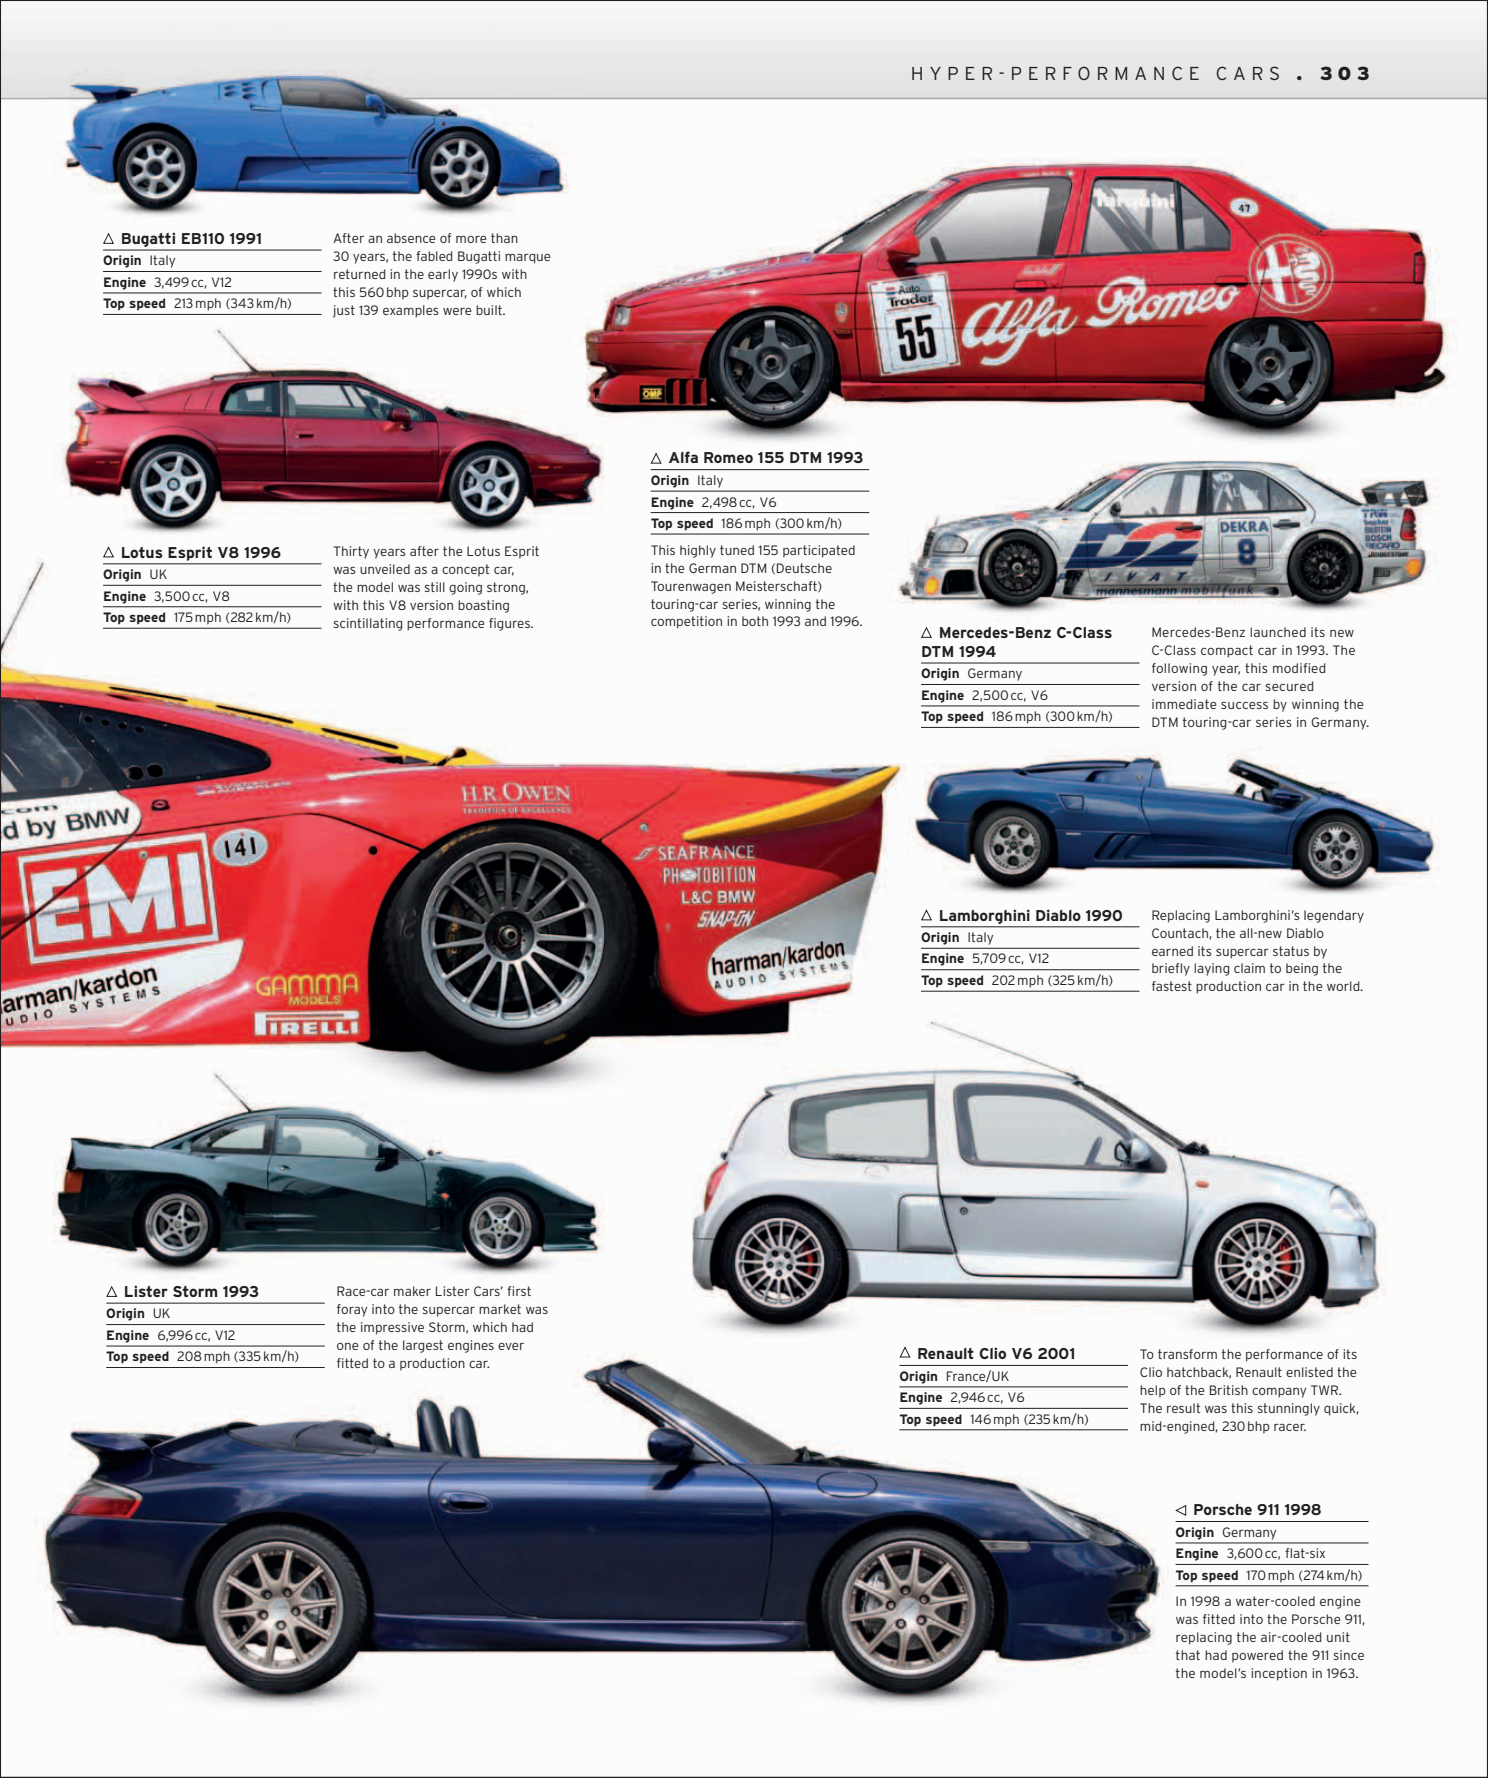 Car%20-%20The%20Definitive%20Visual%20History%20of%20the%20Automobile_305.png